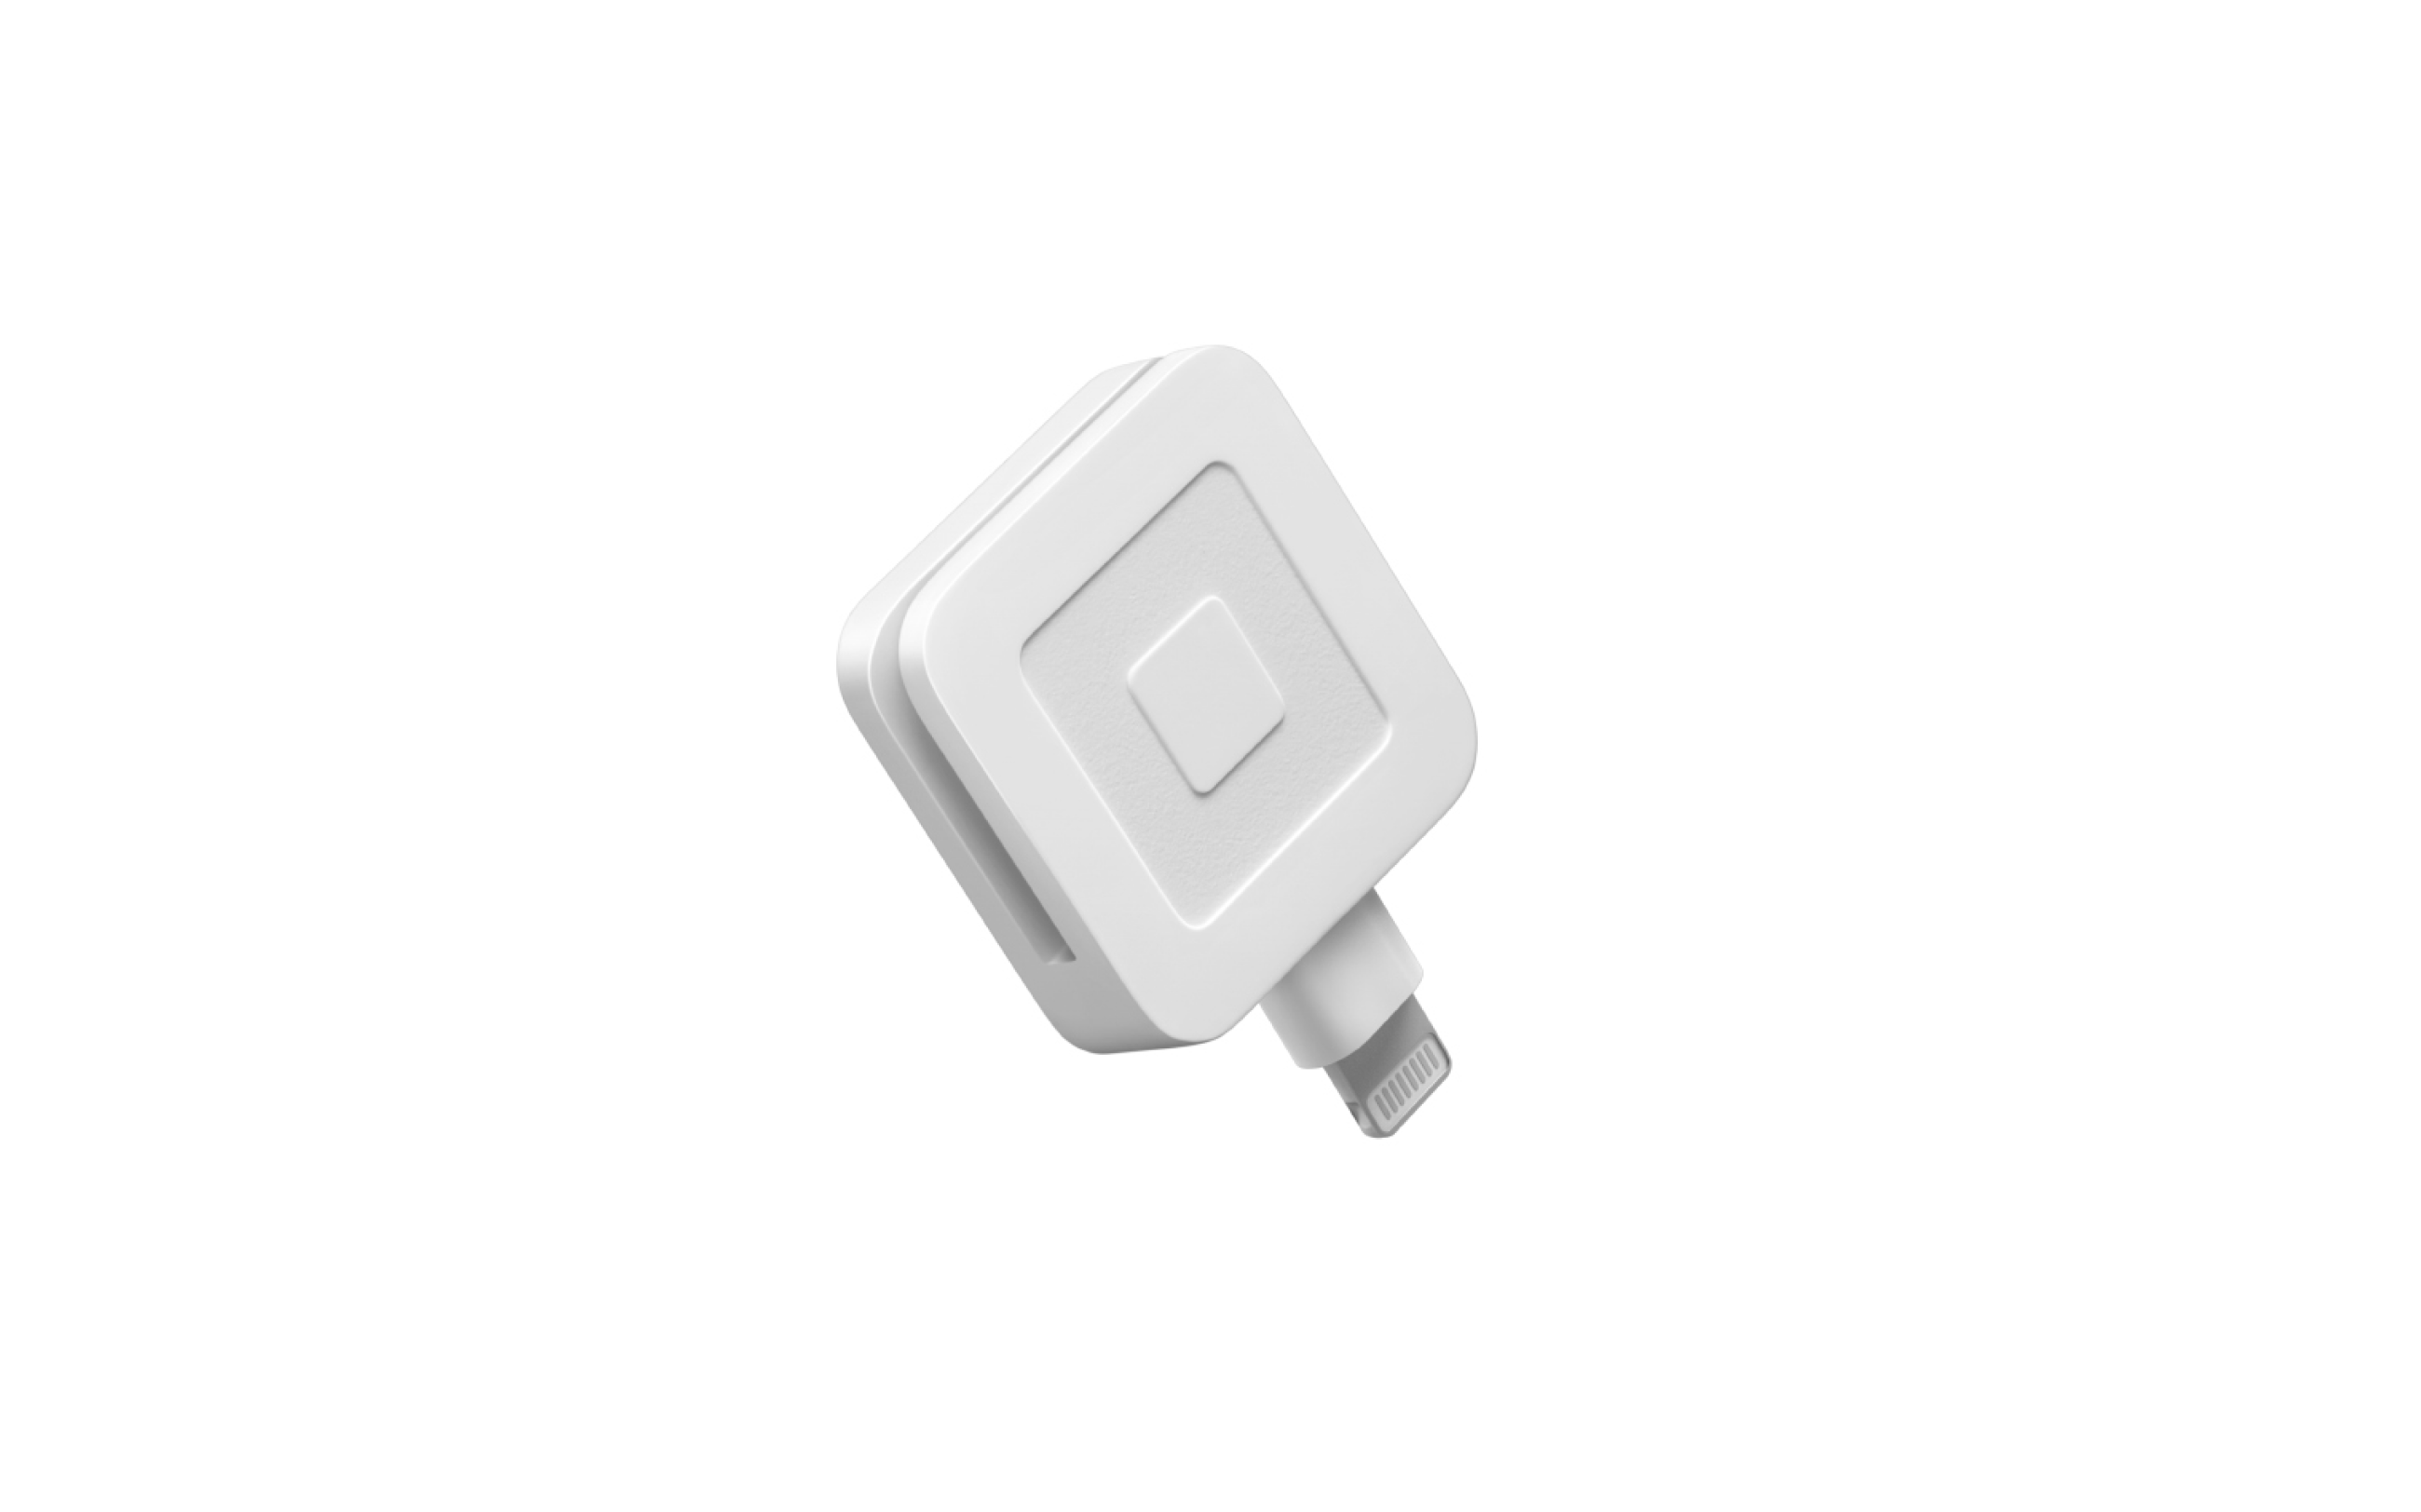 Lightning Connector Square Terminal & A-SKU-0523 Reader for magstripe 